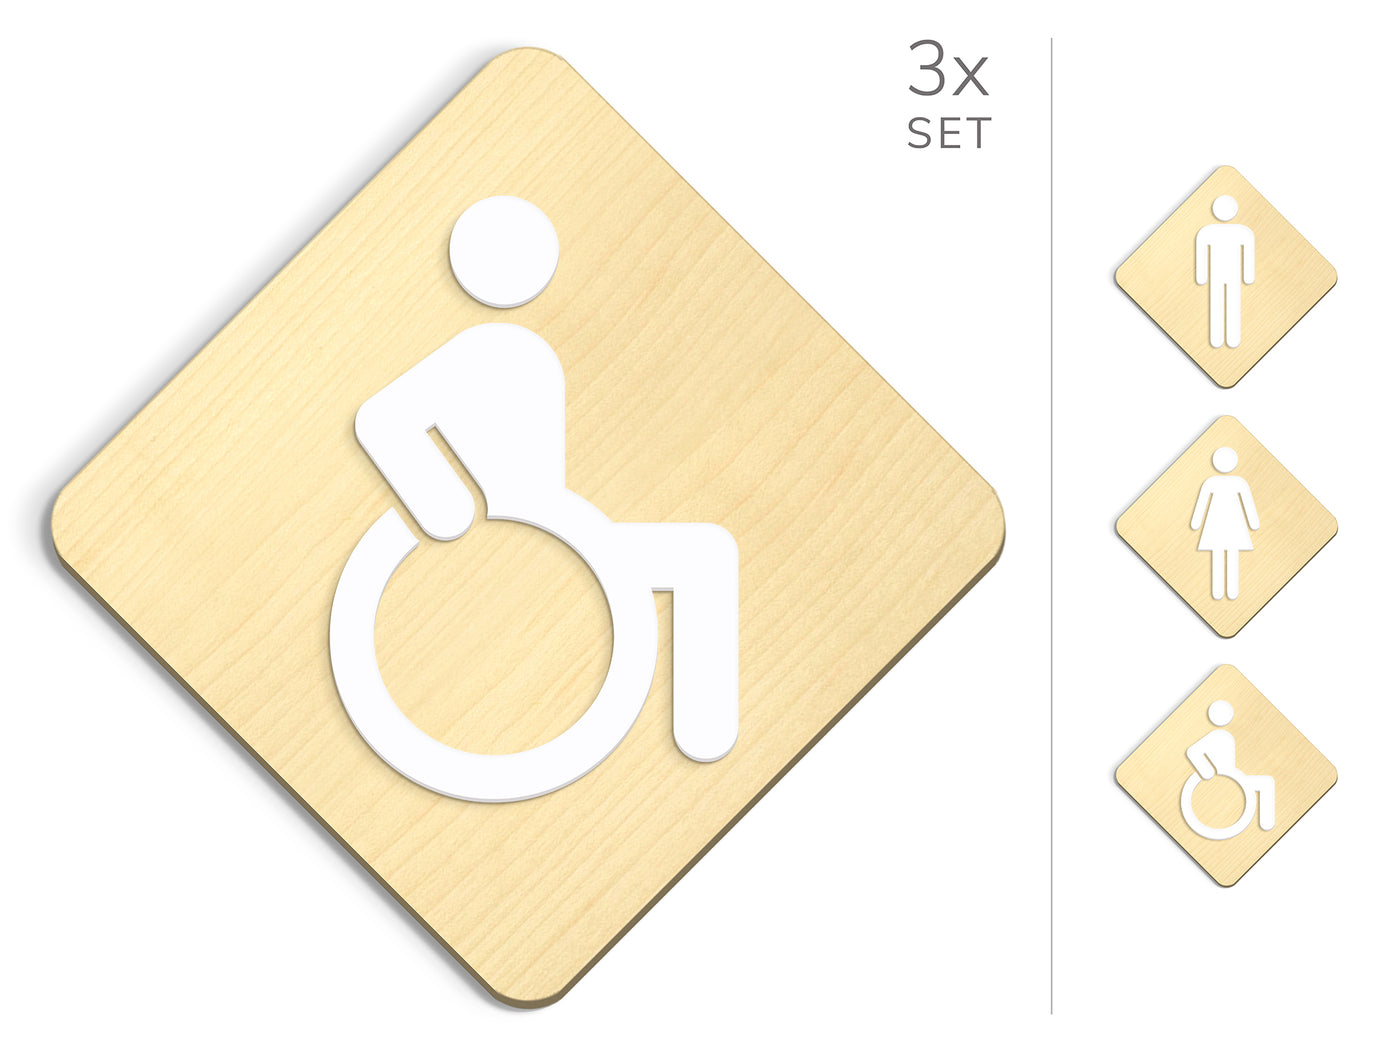 Classic, 3x Rhombus Base - Restroom Signs Set - Man, Woman, Disabled